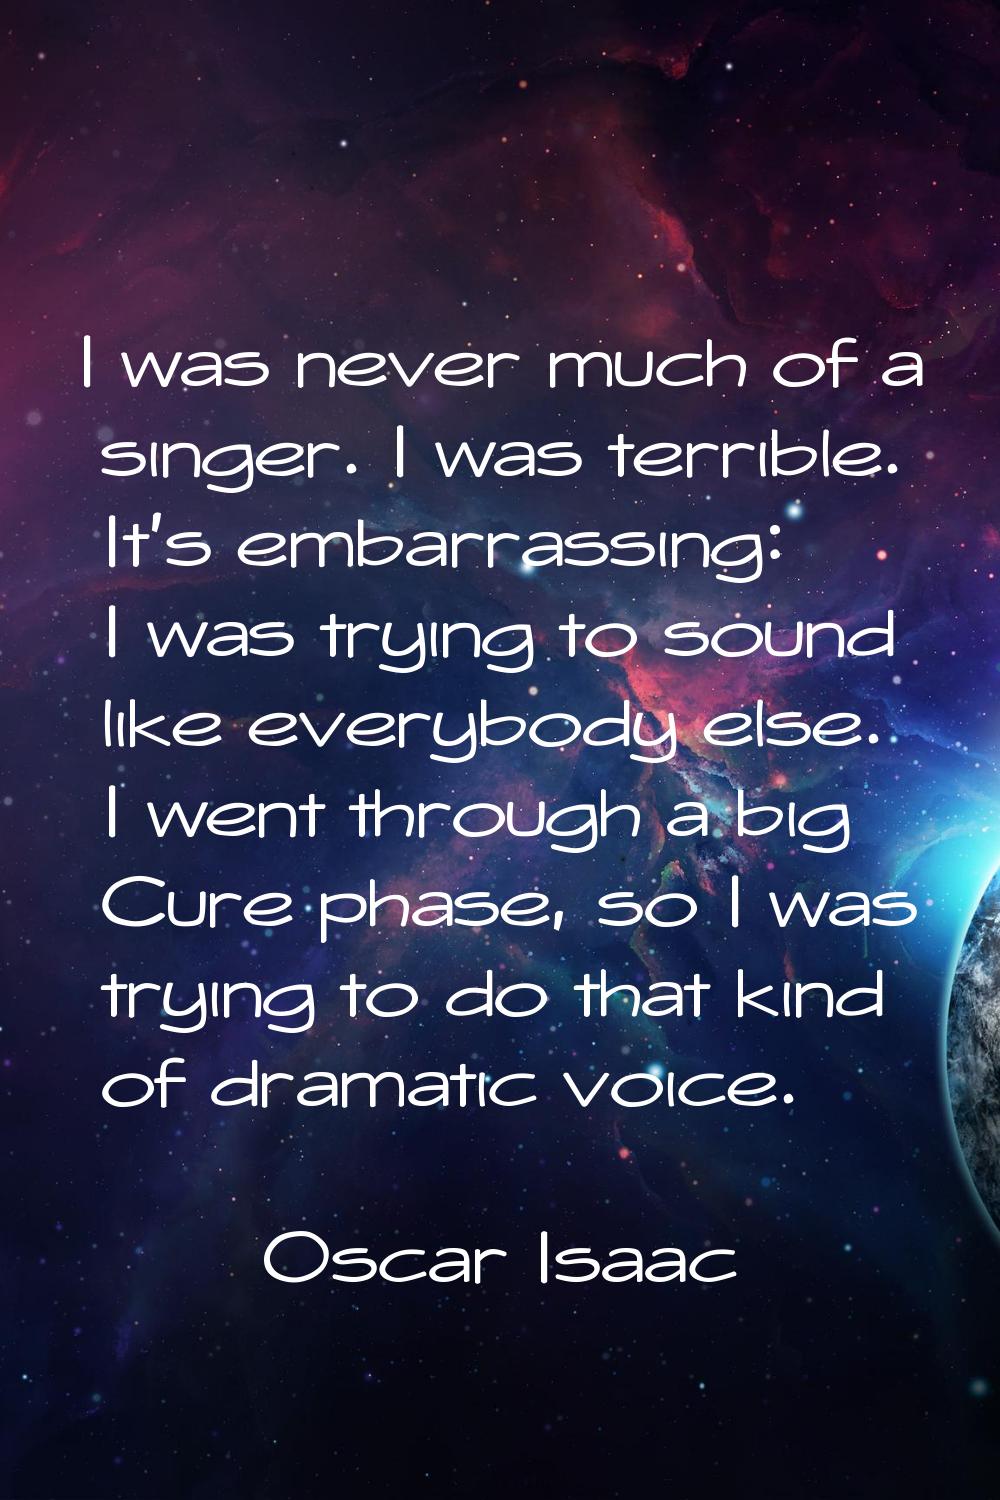 I was never much of a singer. I was terrible. It's embarrassing: I was trying to sound like everybo